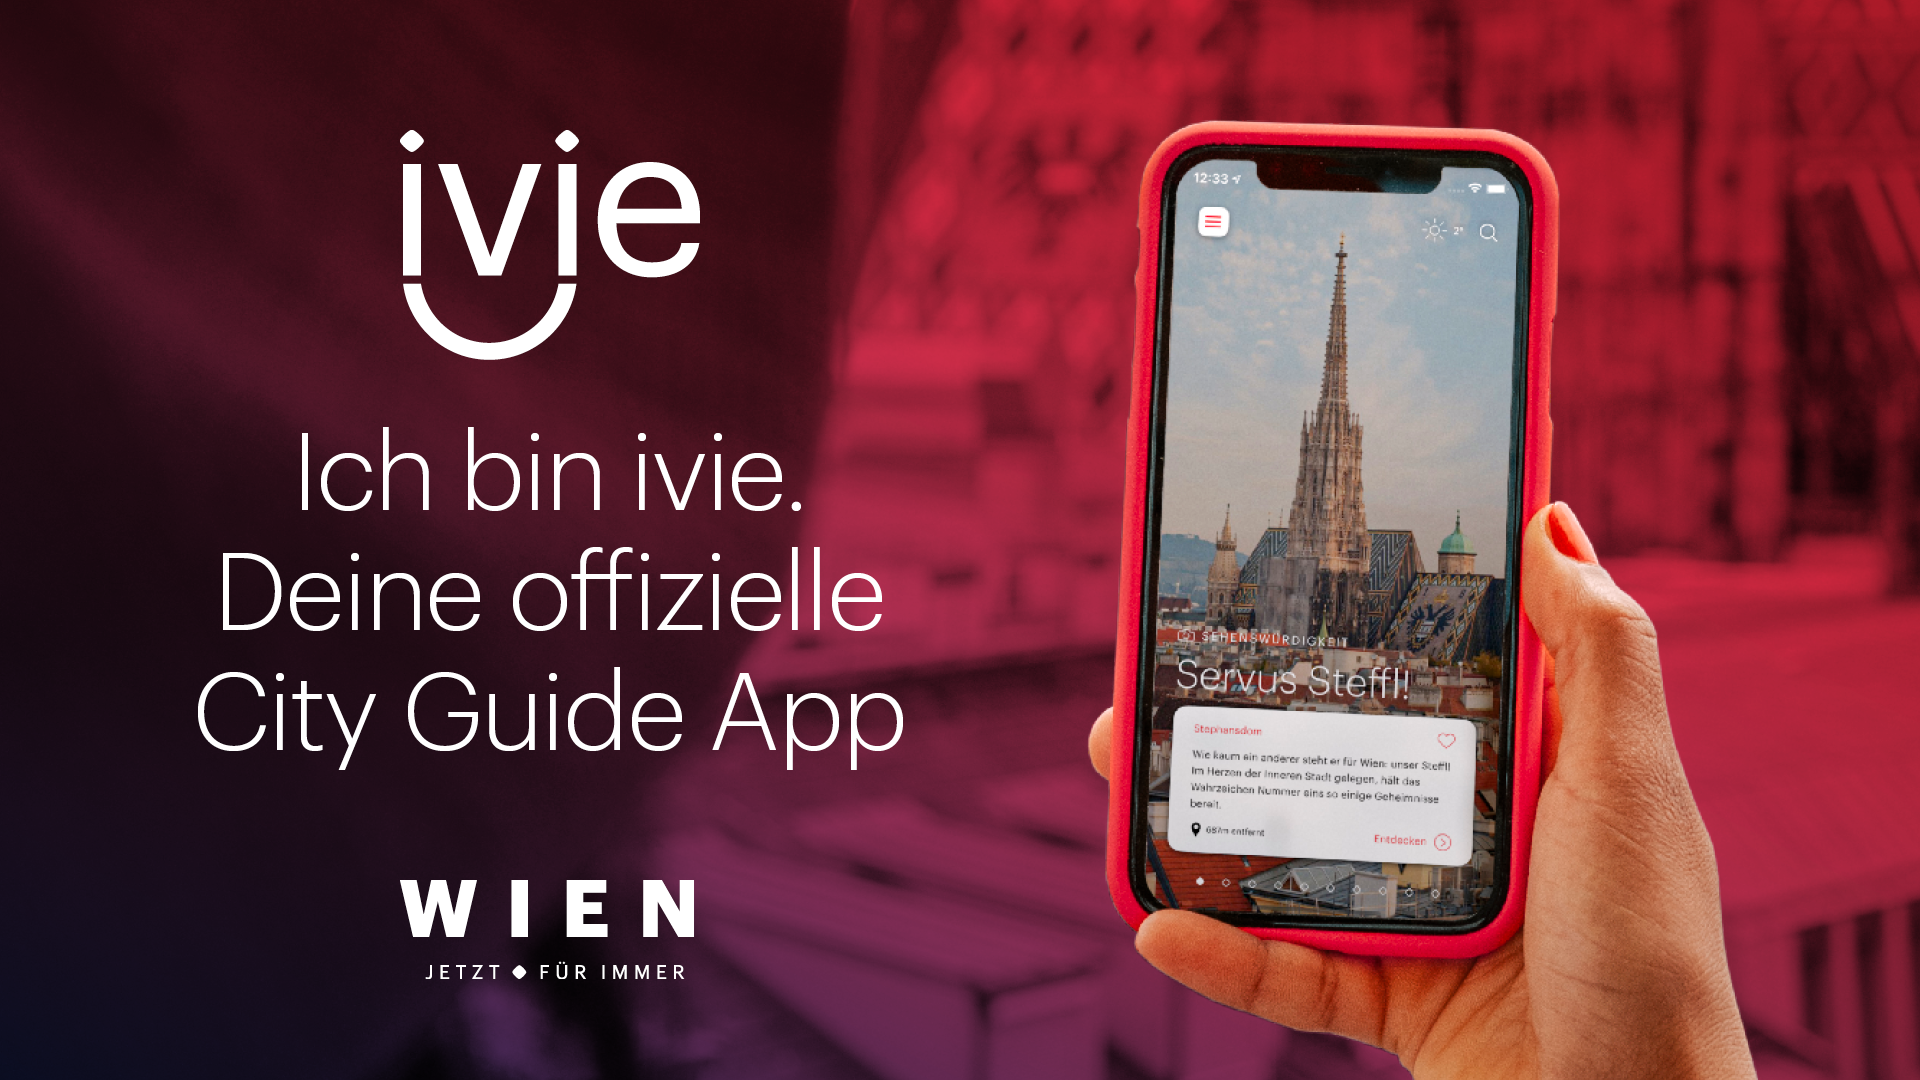 ivie City Guide App Funktionsumfang 